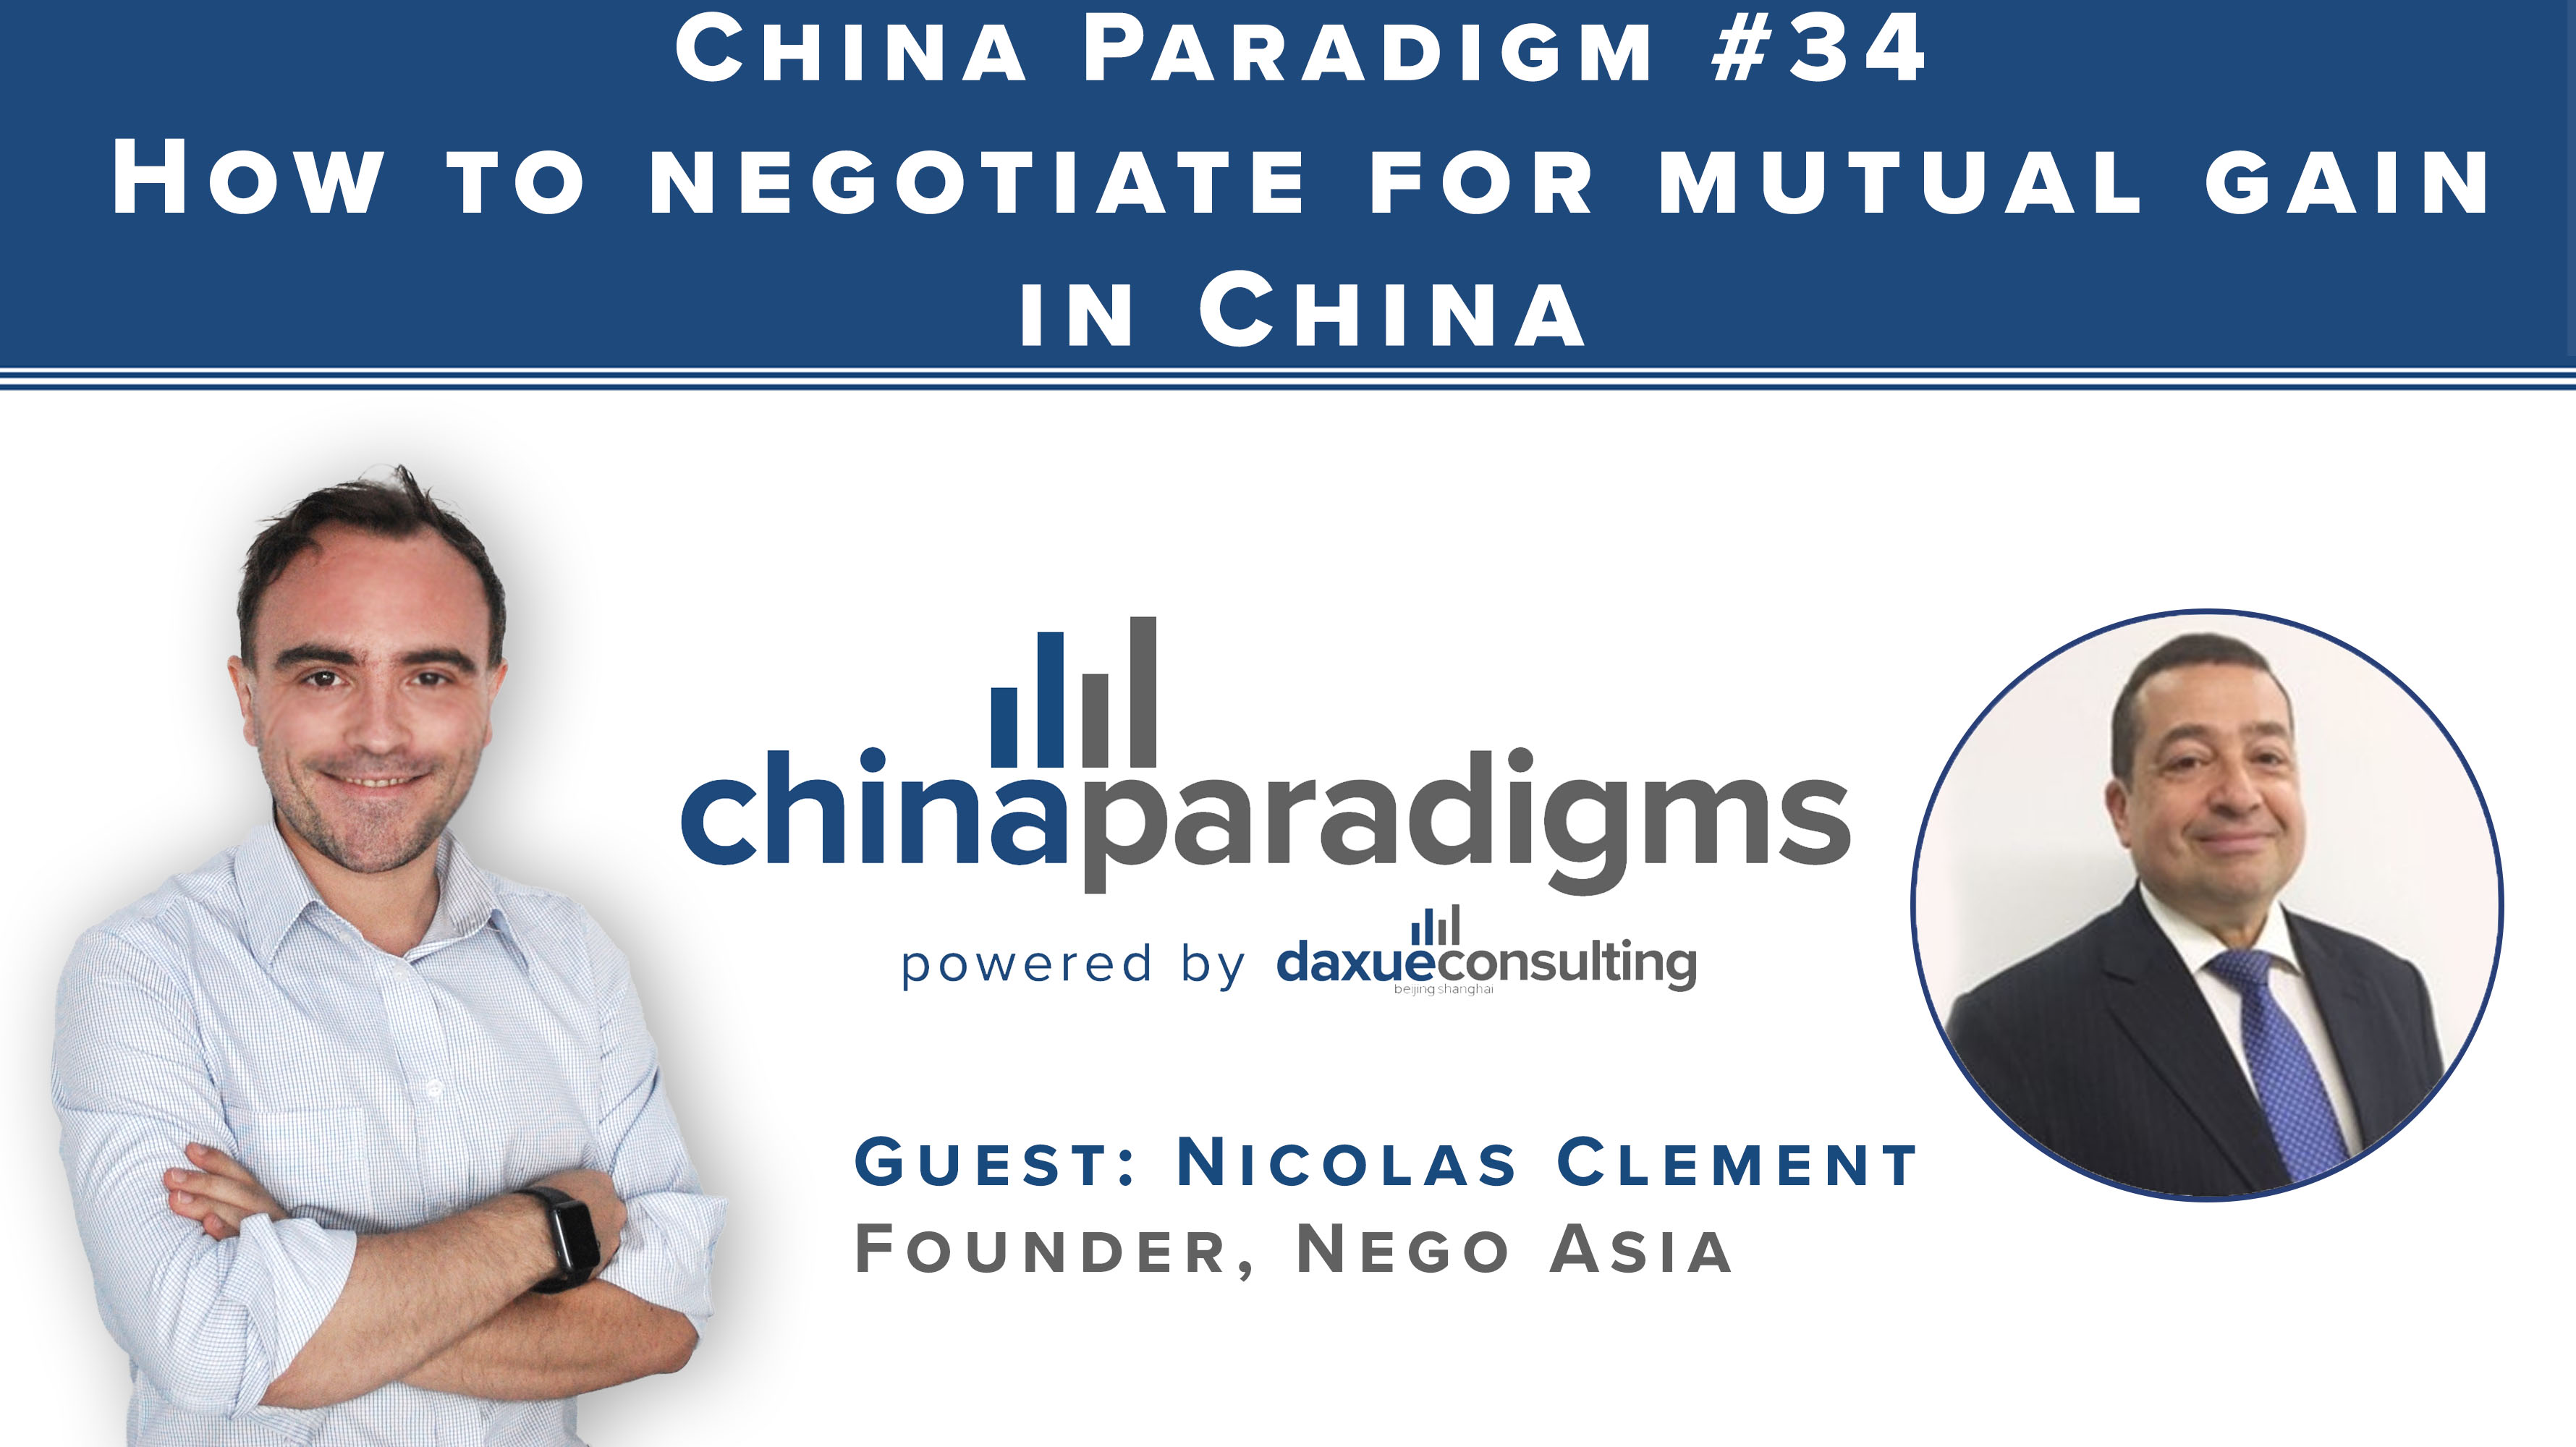 [Podcast] China Paradigm #34: How to negotiate for mutual gain in China